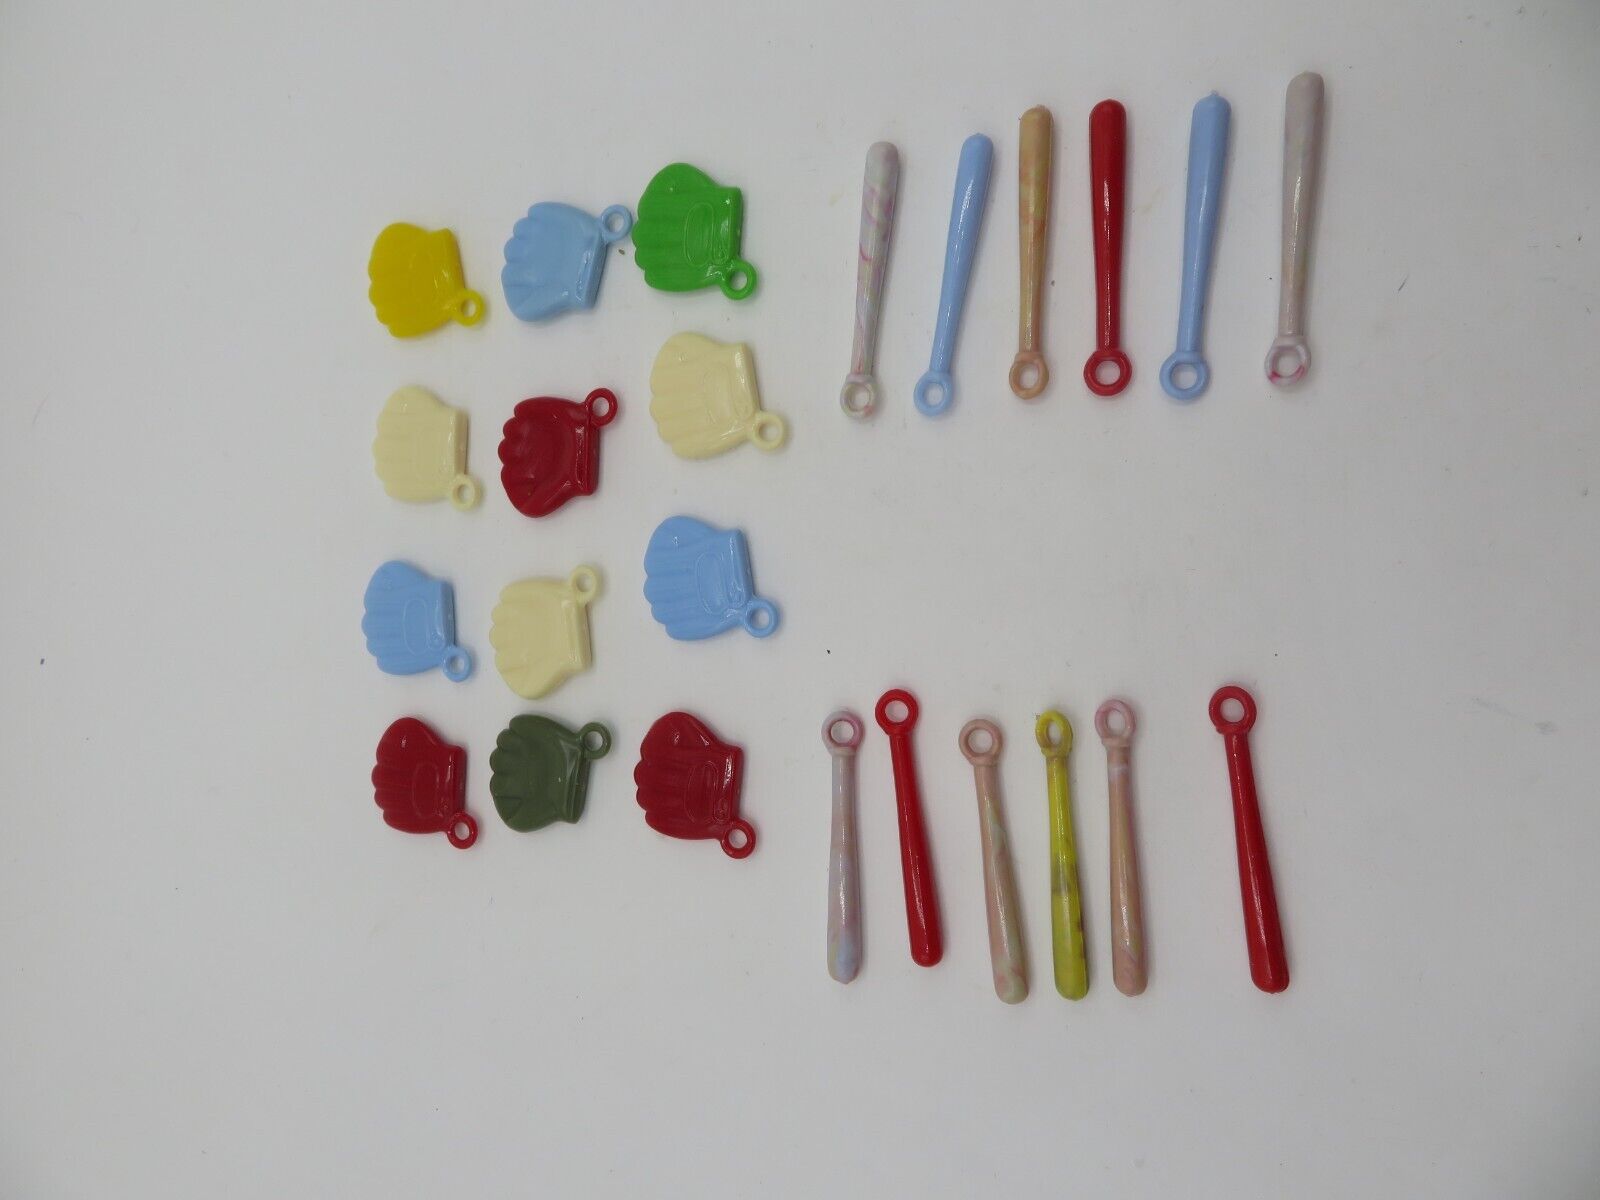 Vintage 1980s Plastic Charms Baseball Mitts & Bats Jewelry Keyrings Cake Toppers